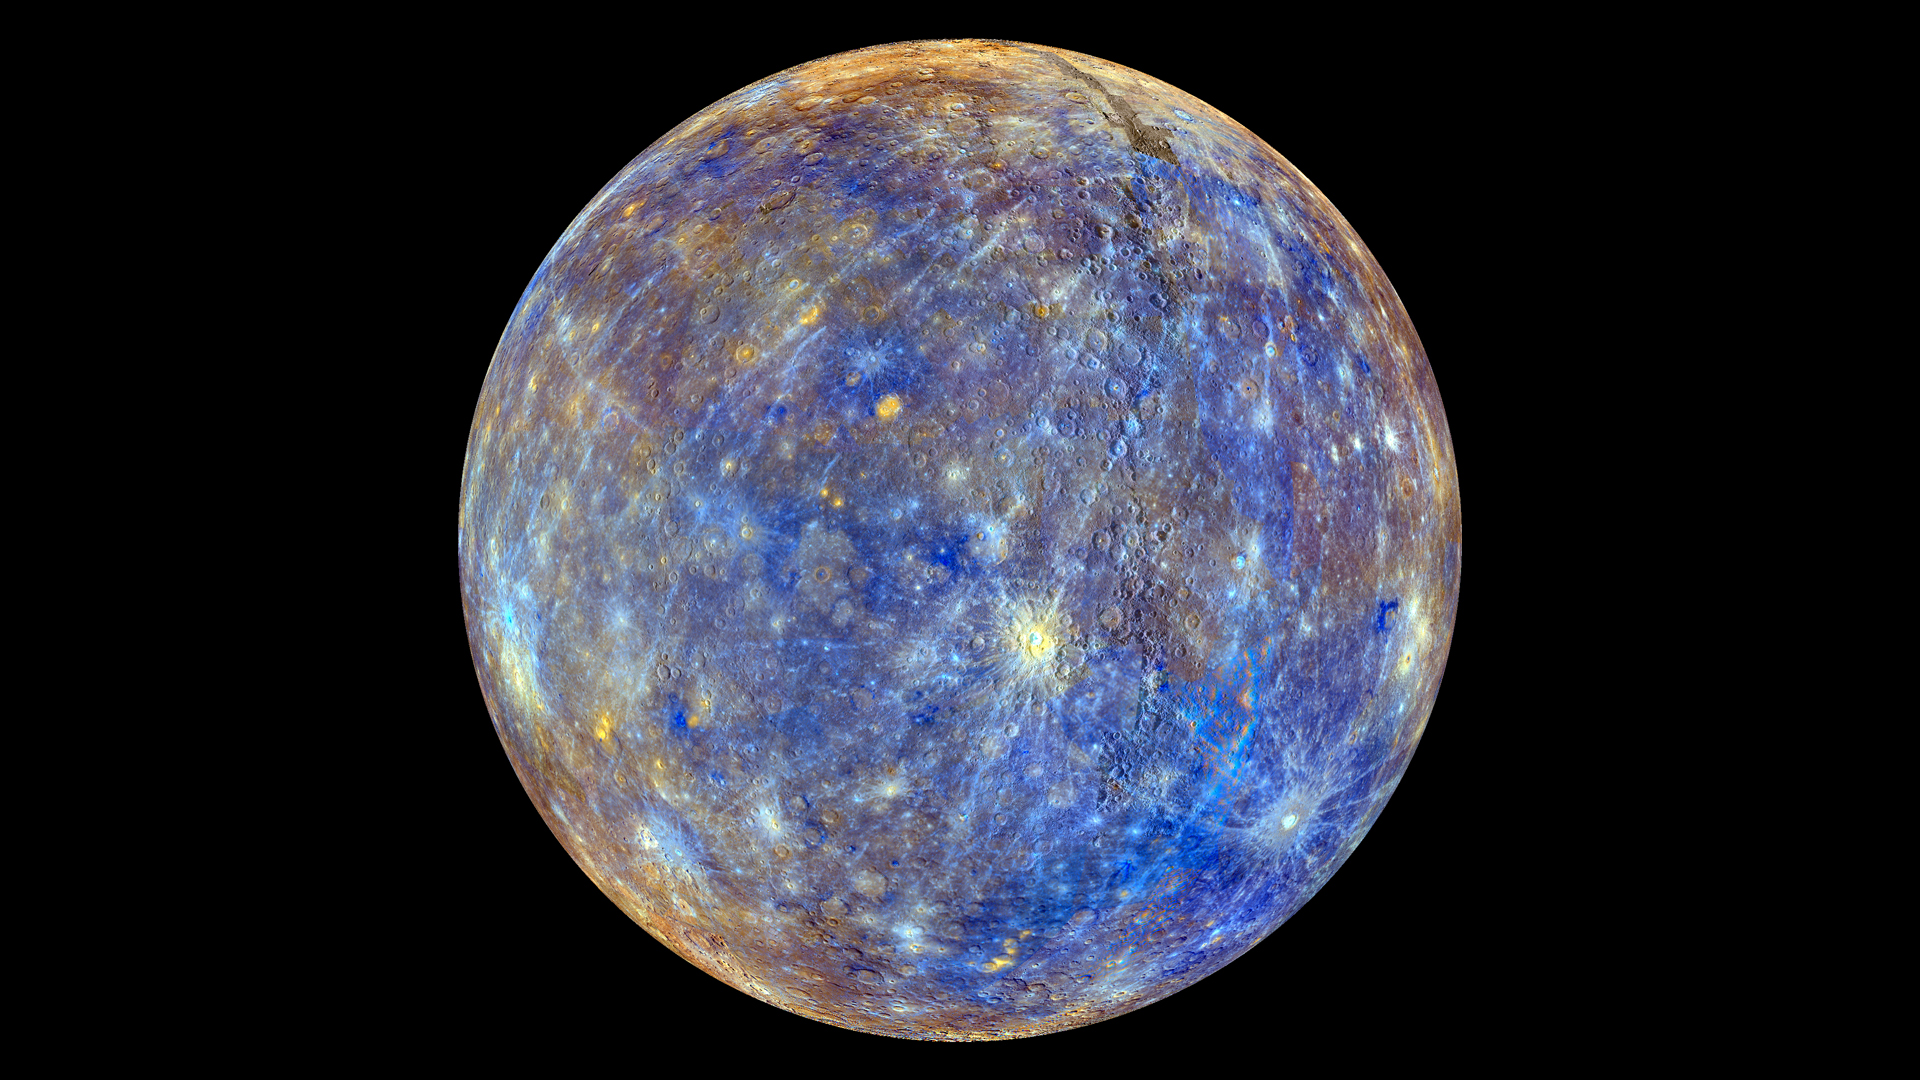 View of Mercury covered in craters. The planet appears blue and more yellow towards the poles.